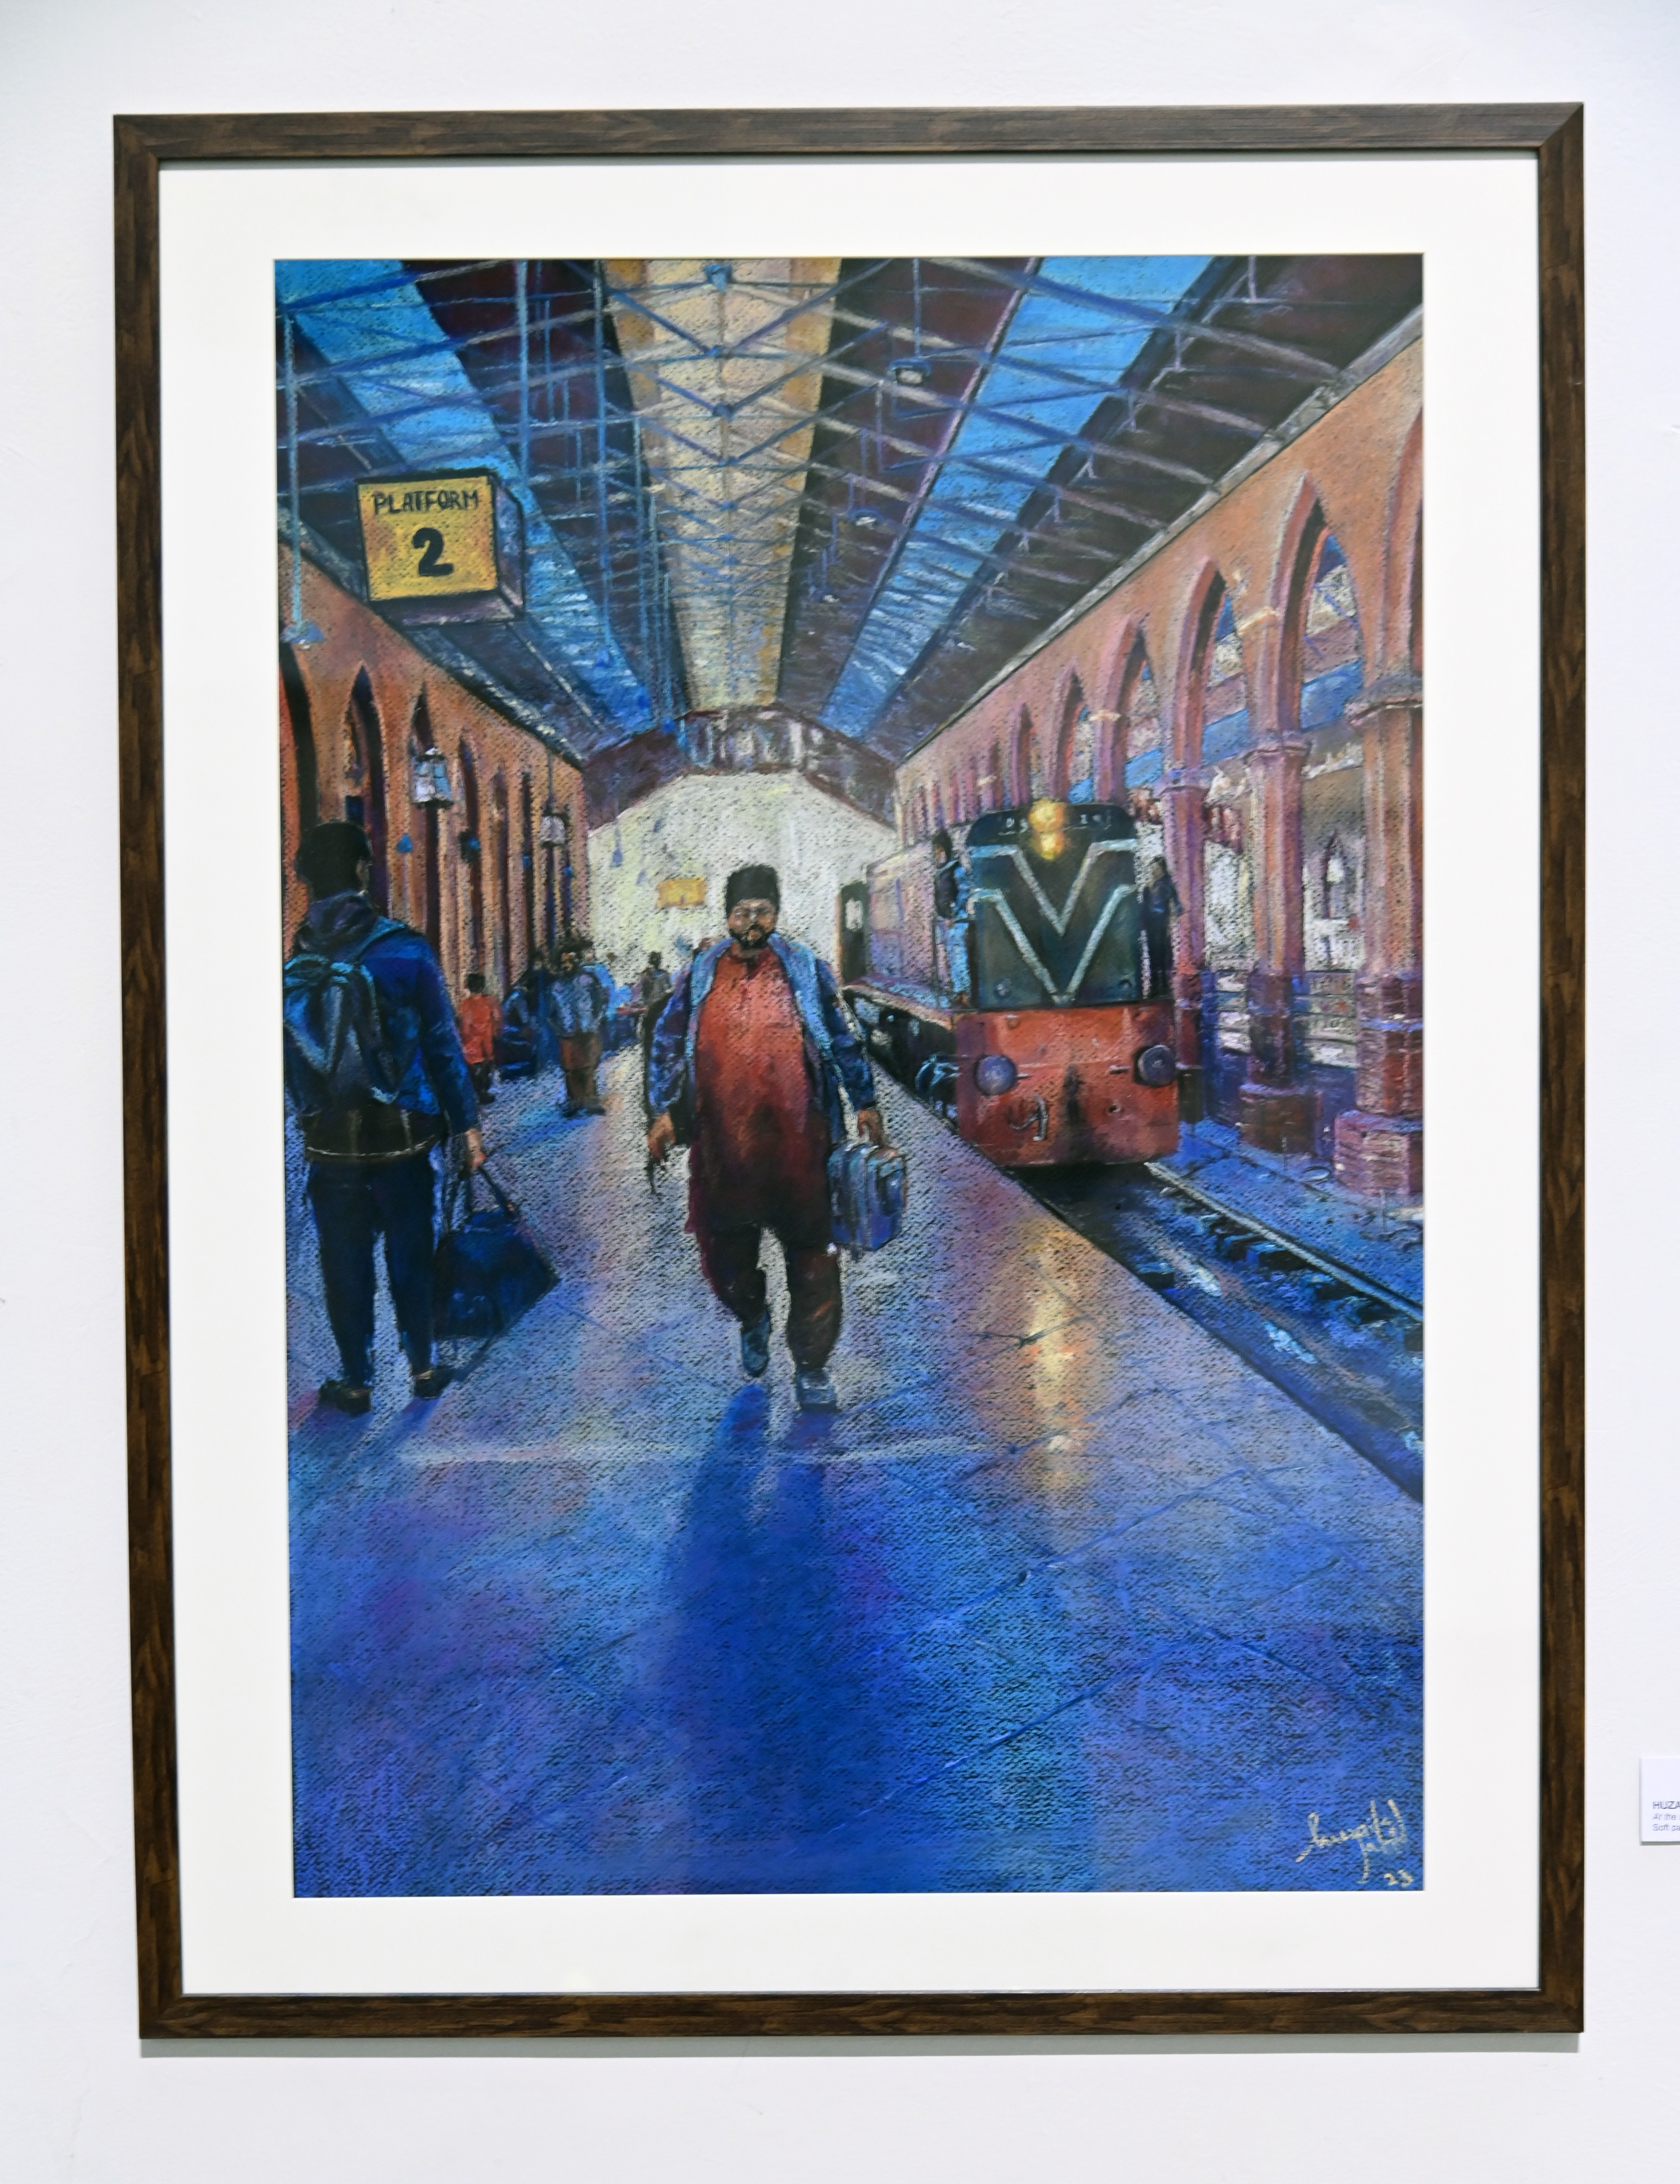 The painting of the Railway platform